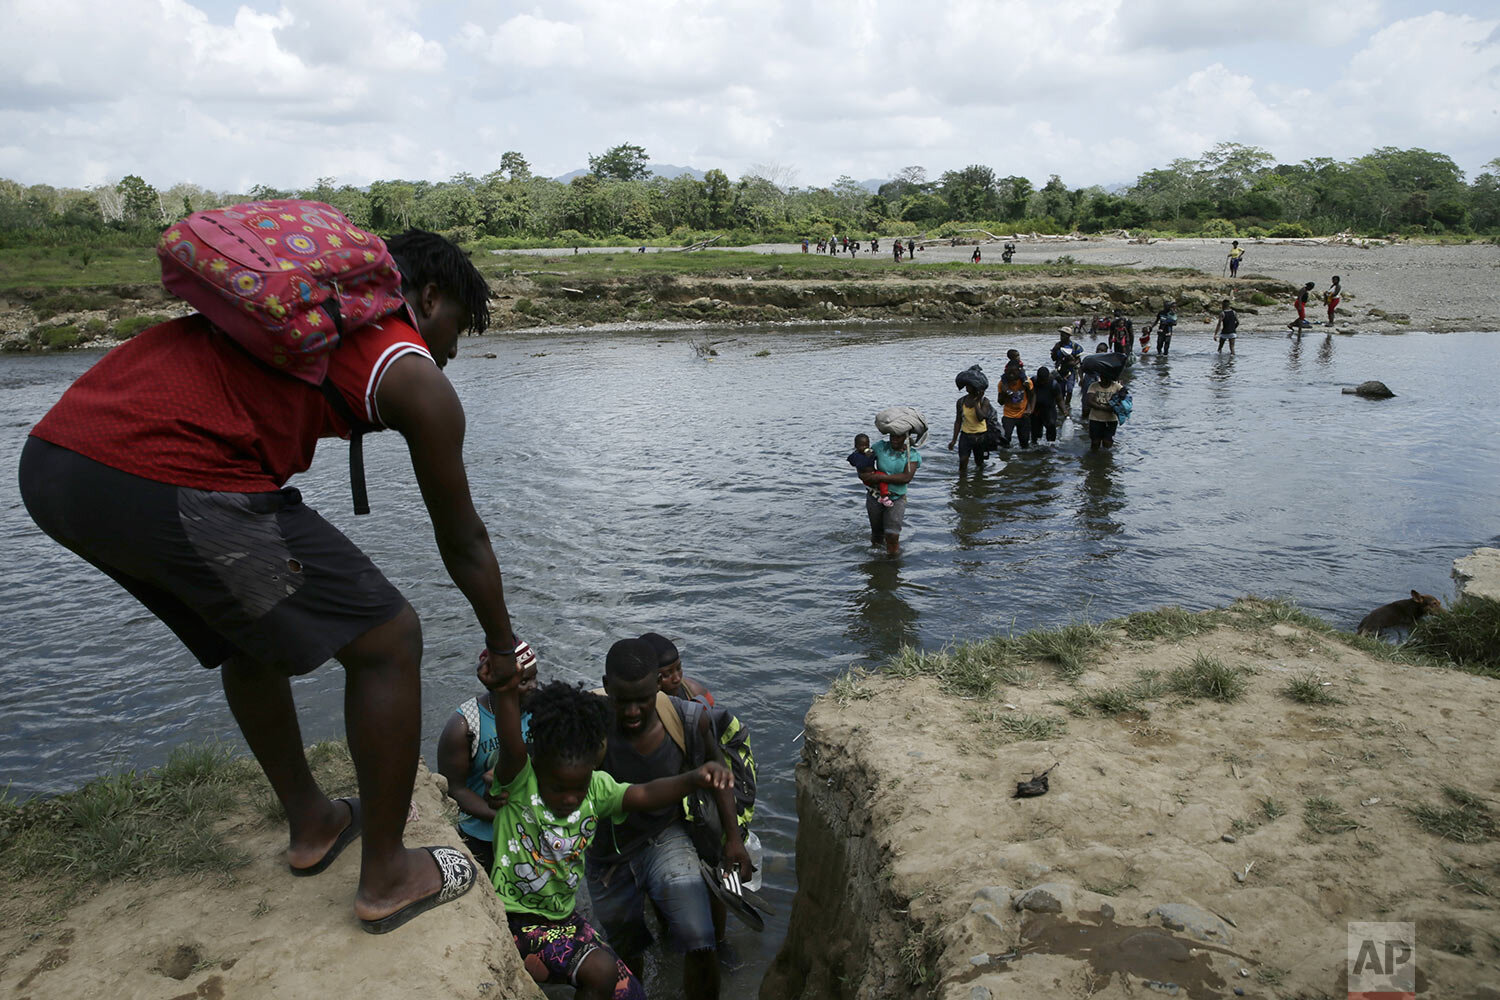  Migrants cross the Tuquesa river after a trip on foot through the jungle to Bajo Chiquito, Darien province, Panama, Feb. 10, 2021. (AP Photo/Arnulfo Franco) 